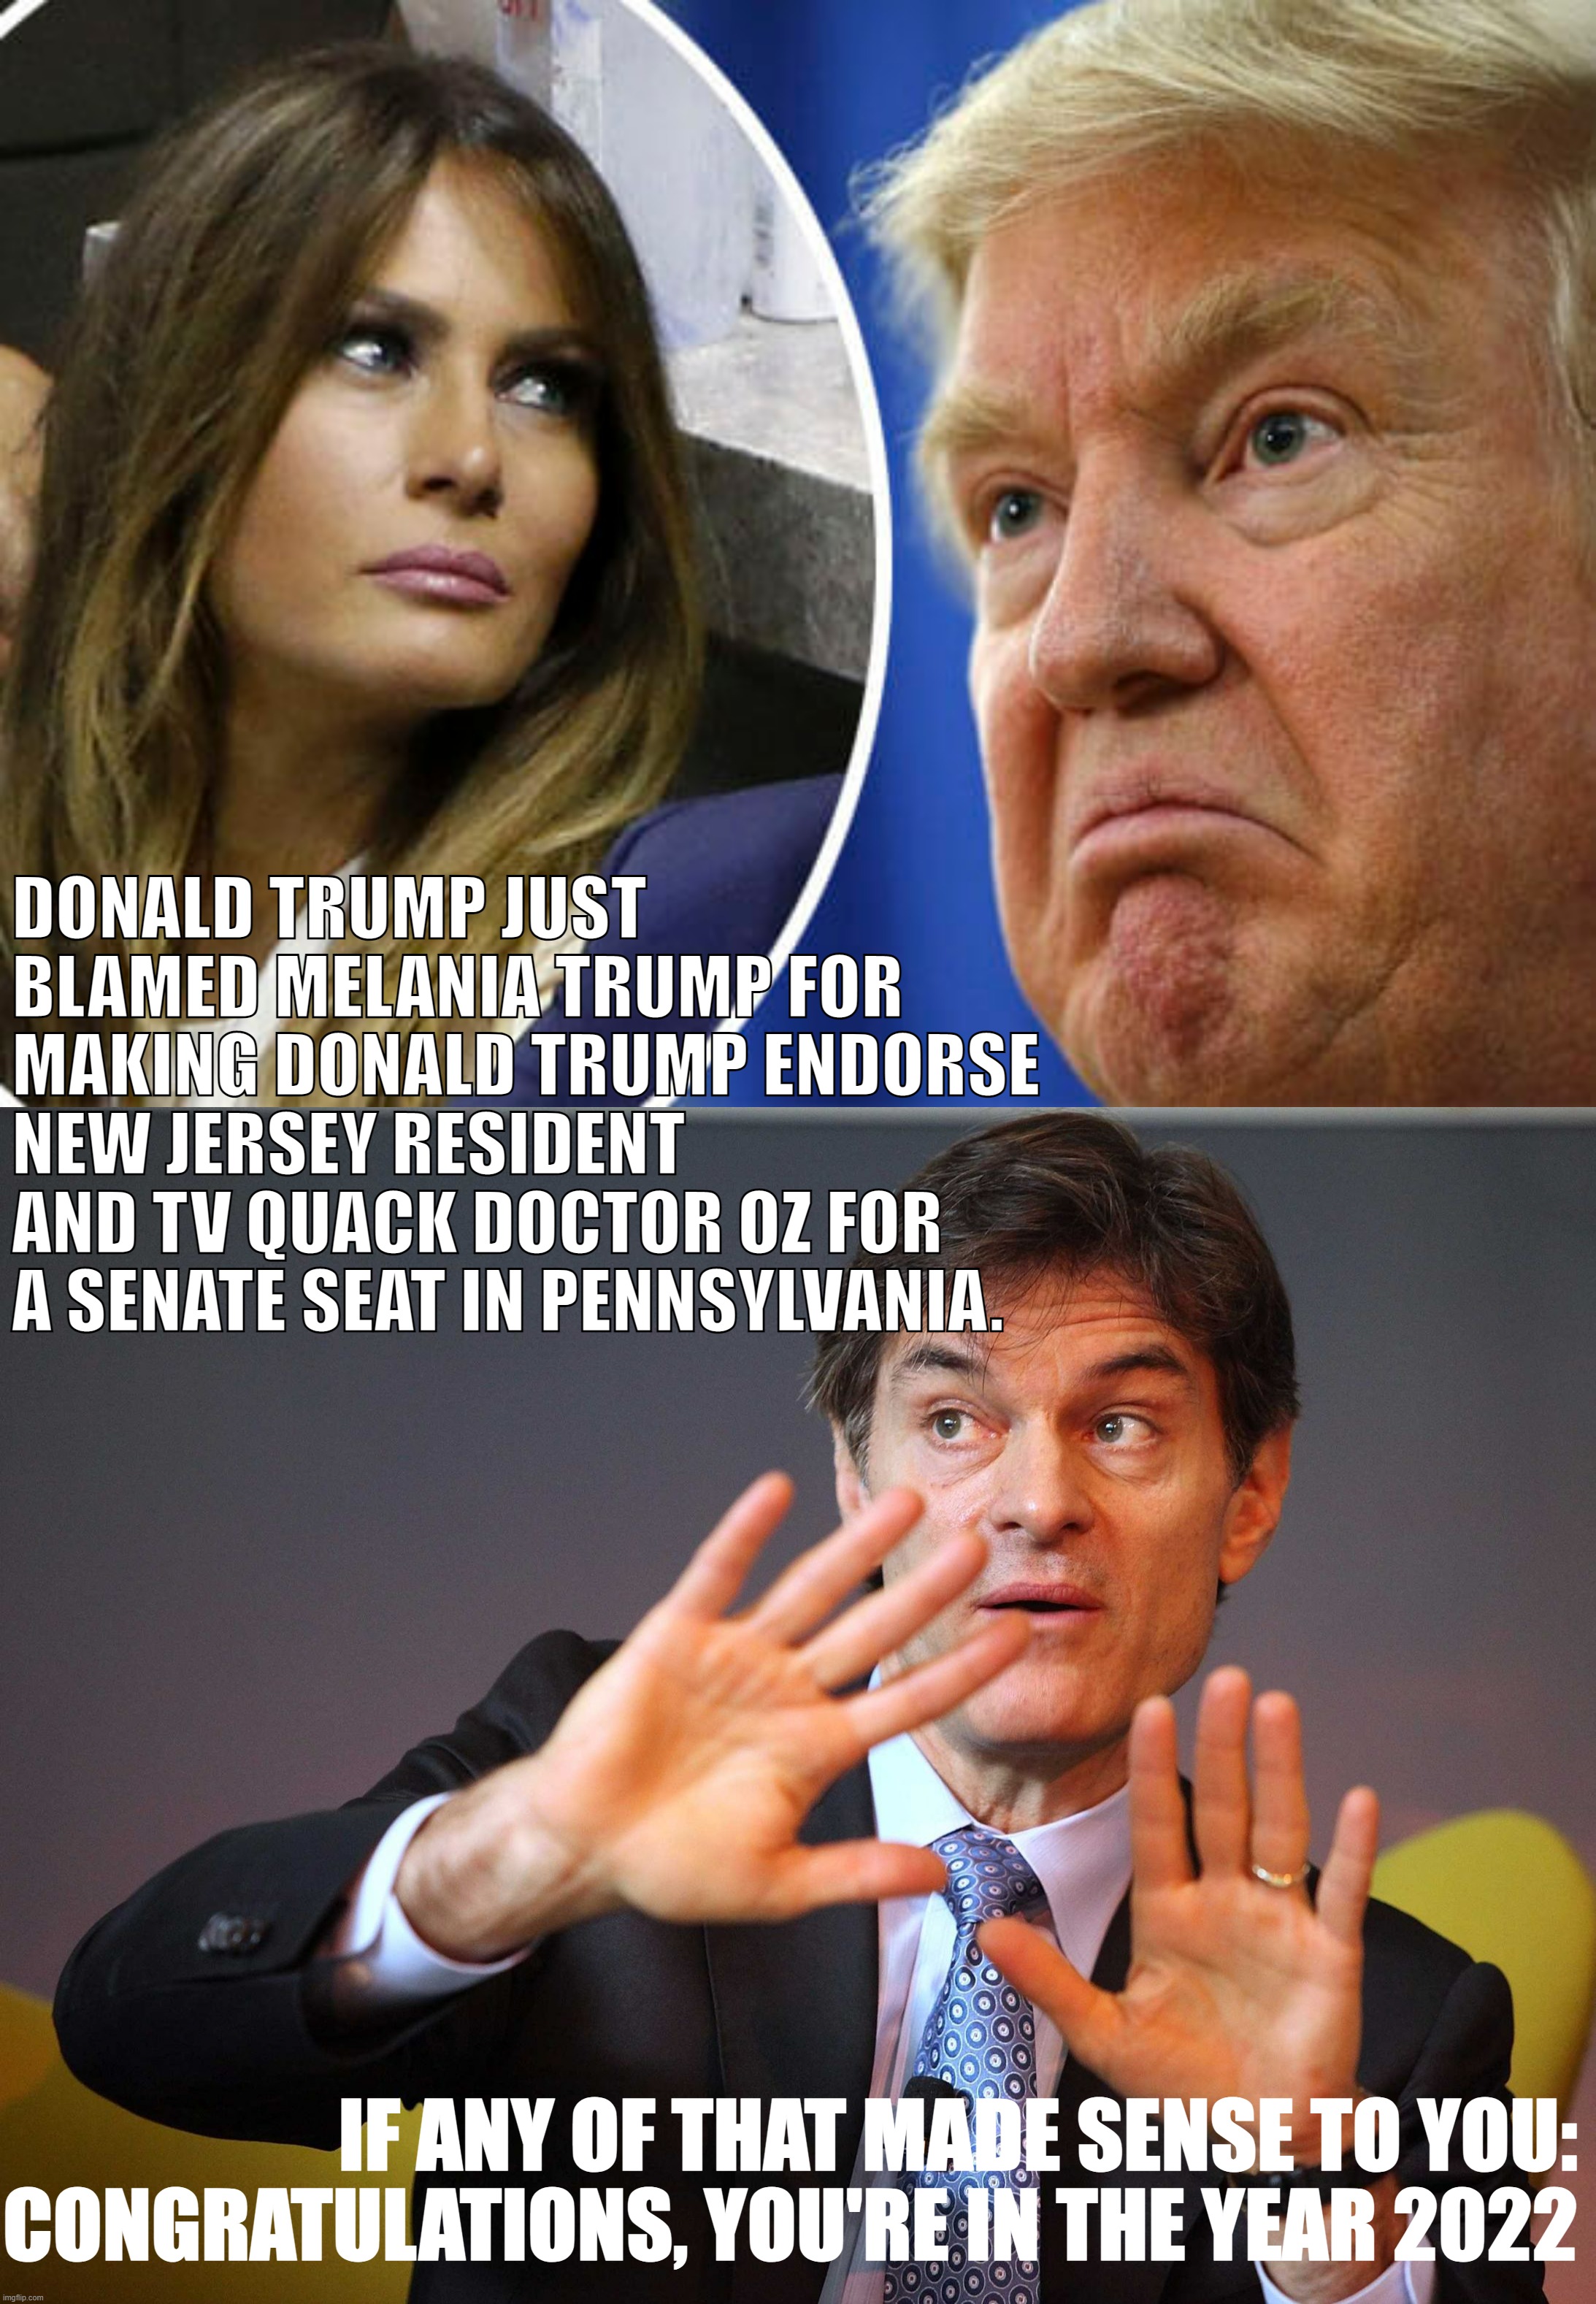 Did you follow? Okay, okay, good - you're up-to-speed | DONALD TRUMP JUST BLAMED MELANIA TRUMP FOR MAKING DONALD TRUMP ENDORSE NEW JERSEY RESIDENT AND TV QUACK DOCTOR OZ FOR A SENATE SEAT IN PENNSYLVANIA. IF ANY OF THAT MADE SENSE TO YOU: CONGRATULATIONS, YOU'RE IN THE YEAR 2022 | image tagged in trump and melania,dr oz,trump,donald trump,melania trump,you have now entered the year 2022 | made w/ Imgflip meme maker